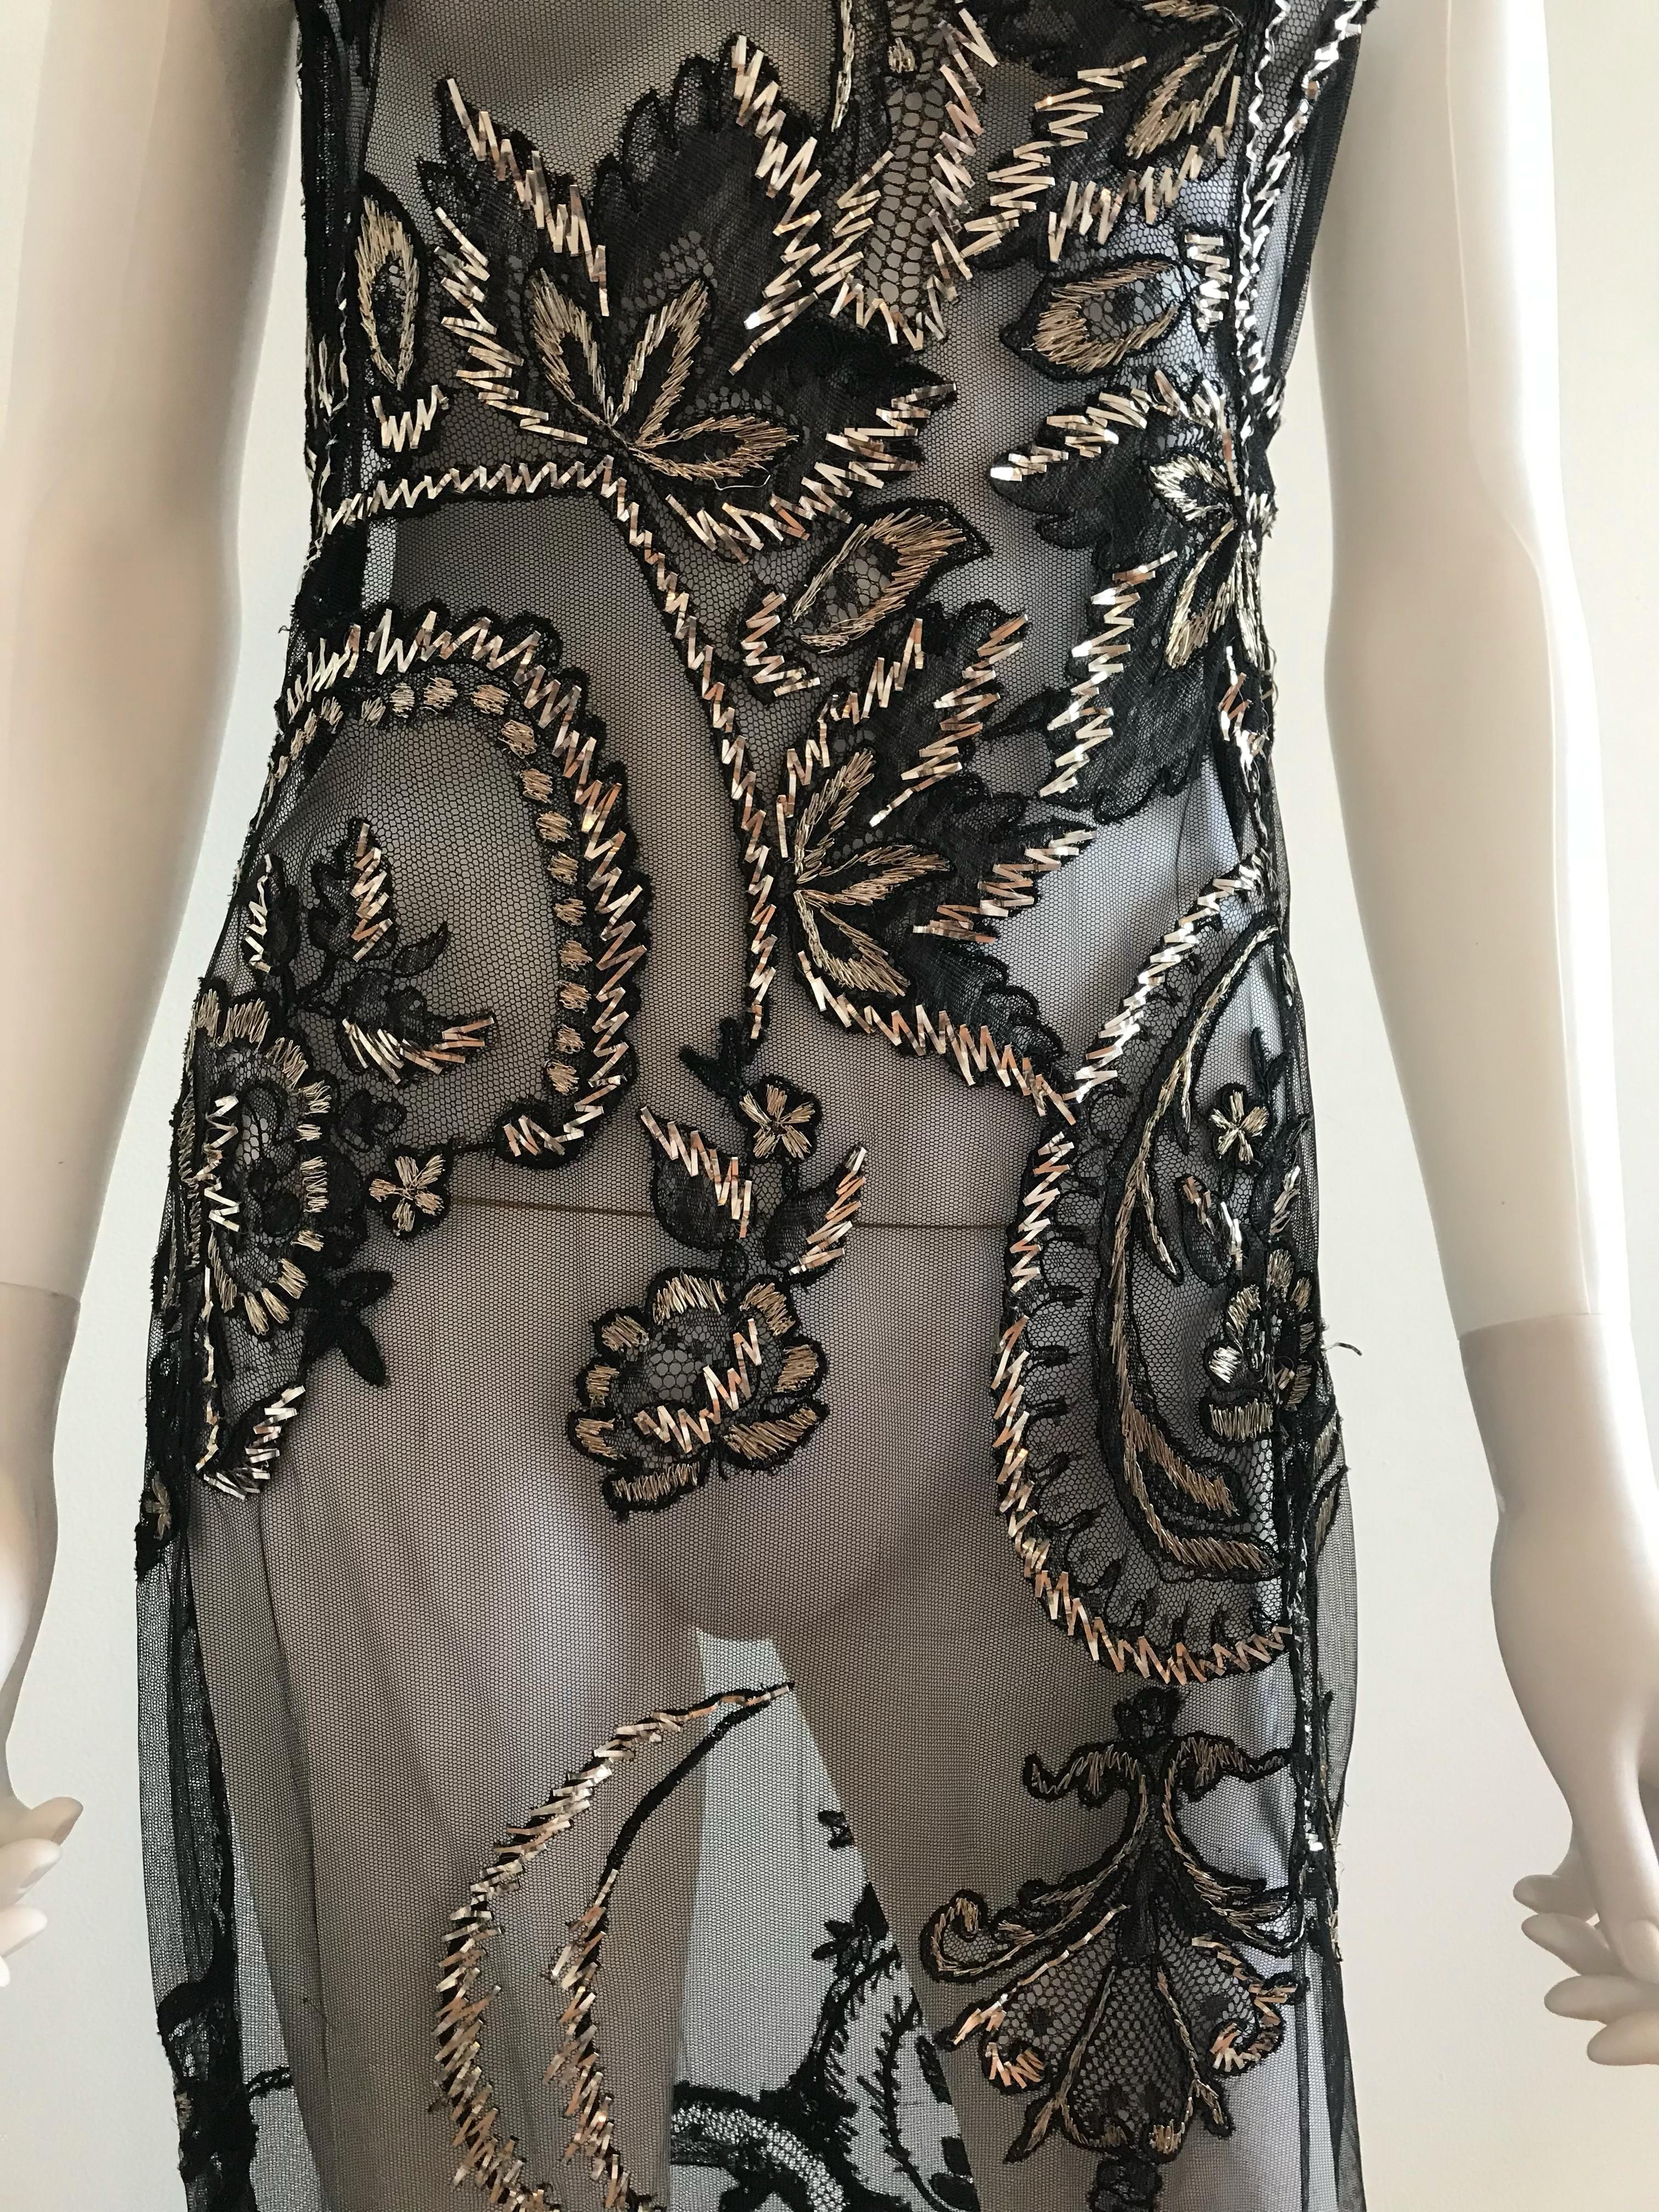 FW 1998 Gianfranco Ferre Metallic Embroidered Tulle Evening Gown For Sale 11